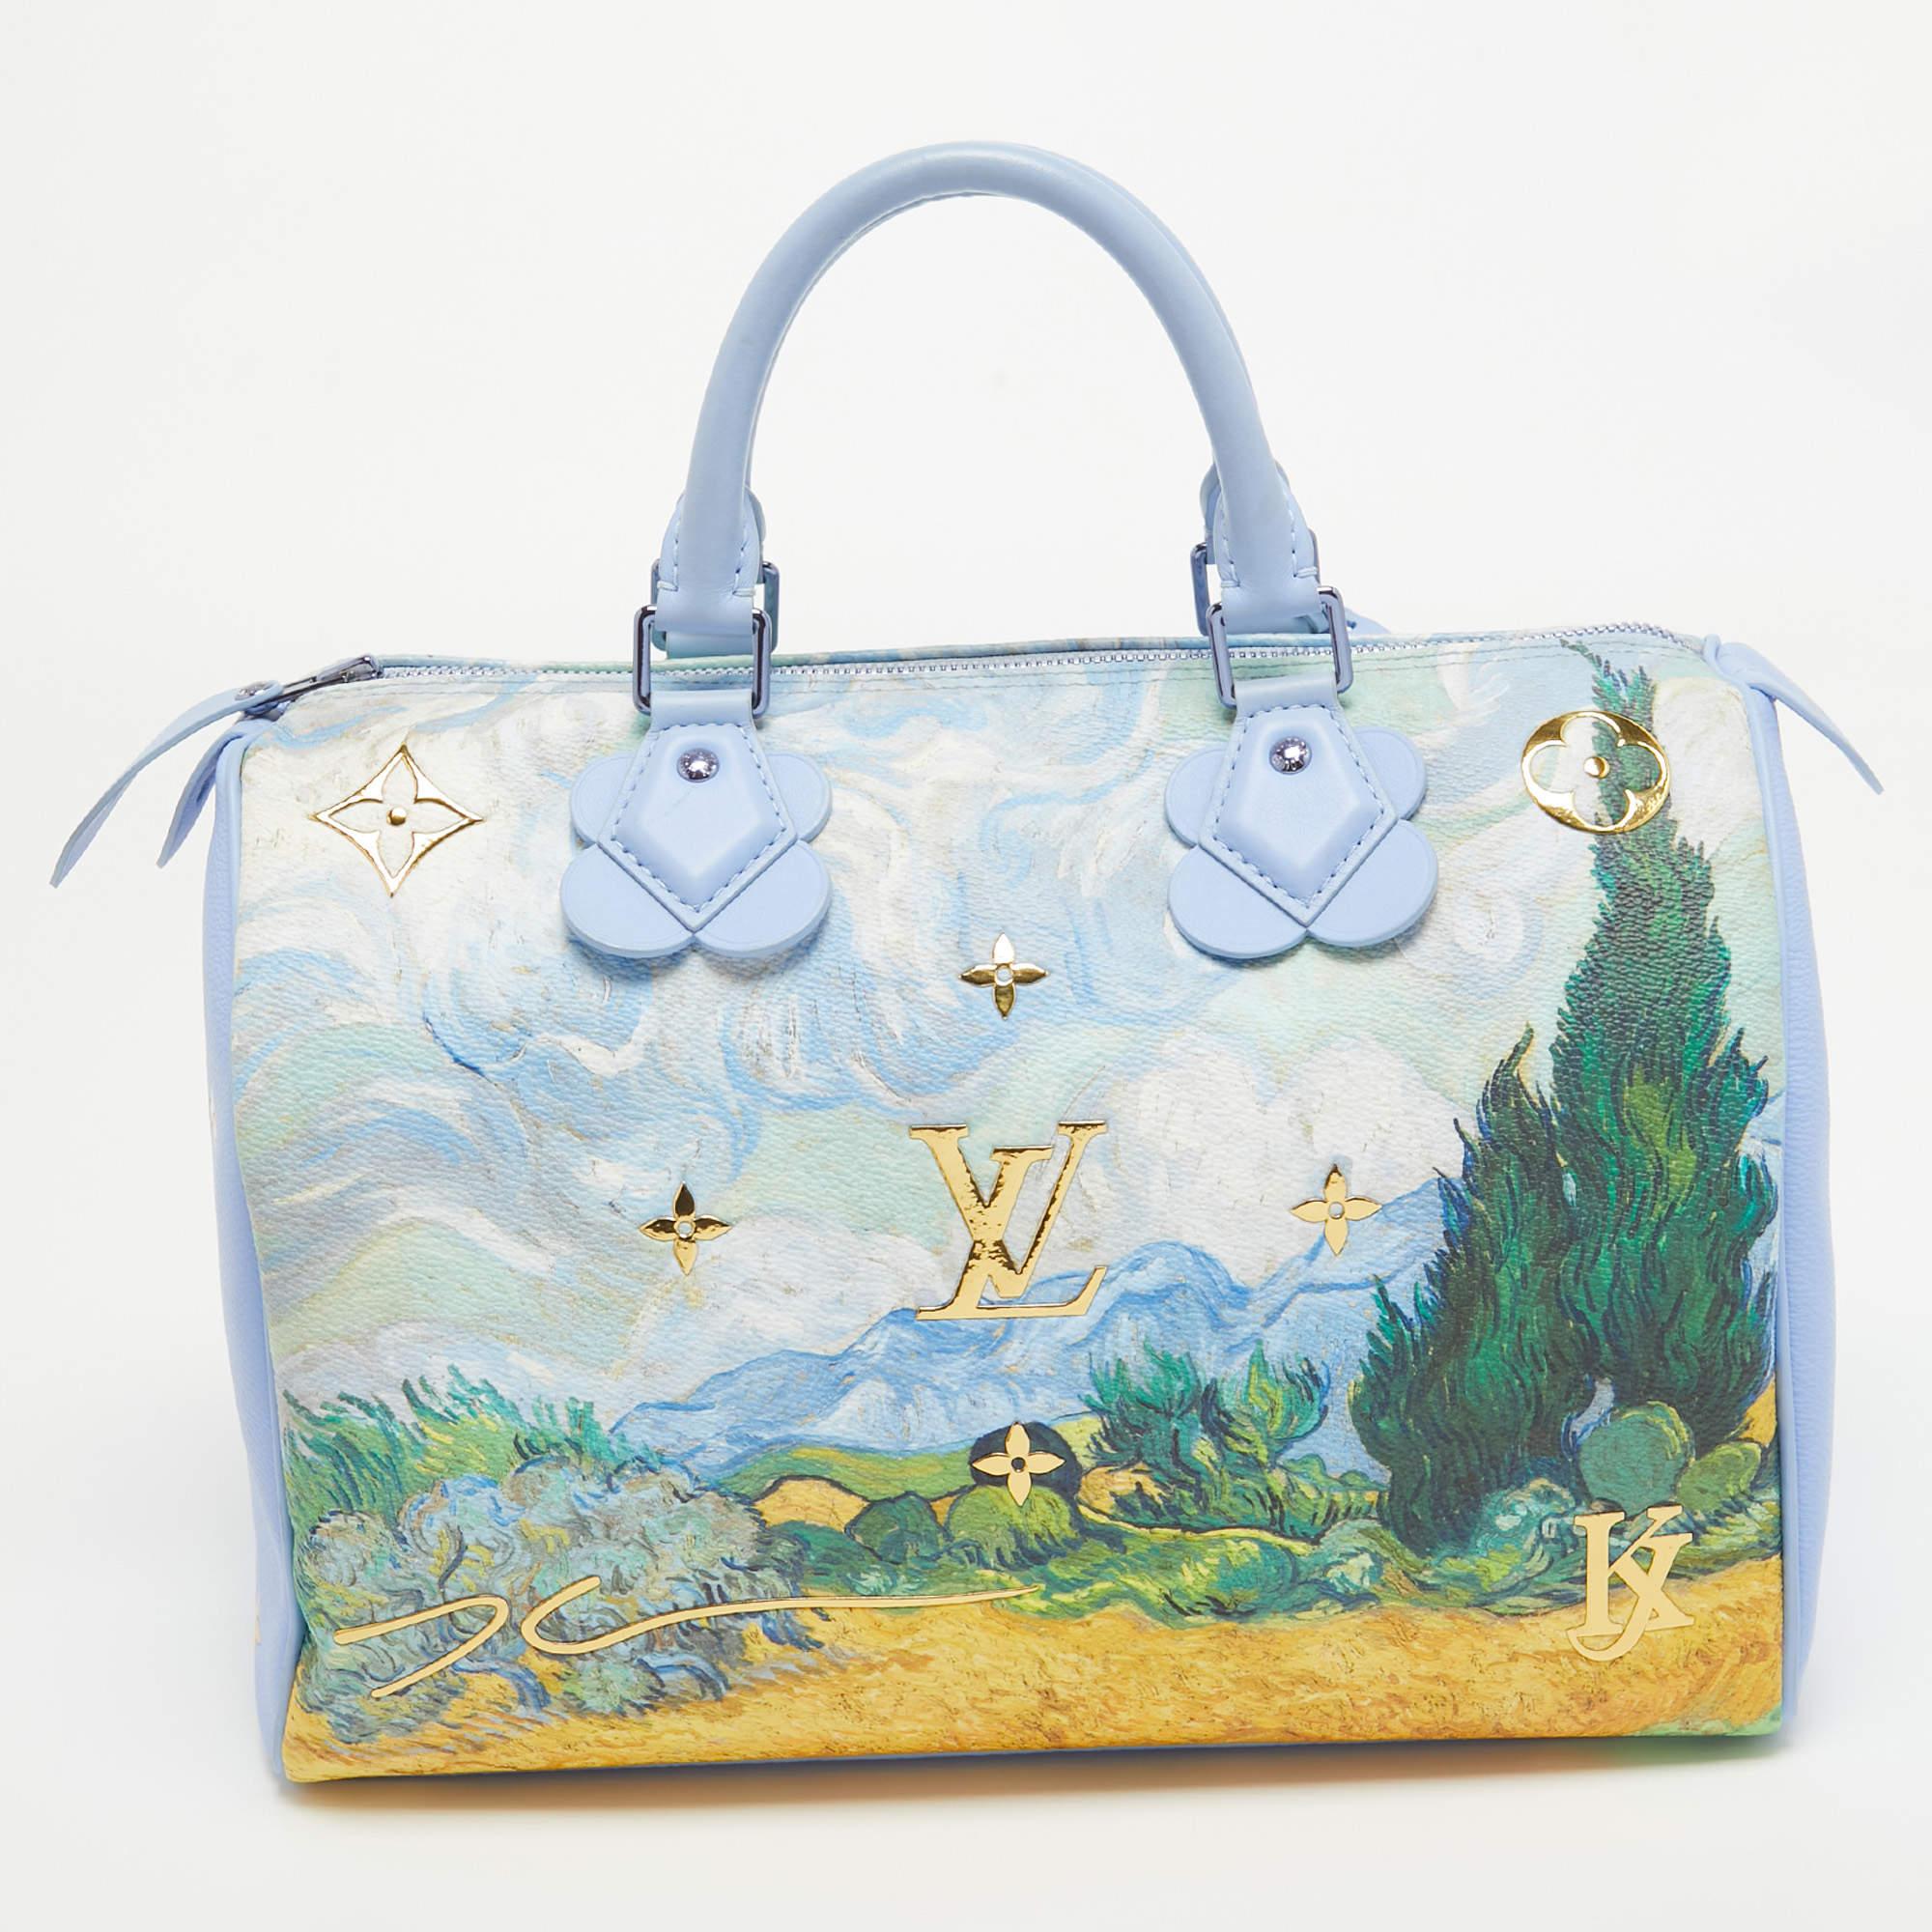 Introducing the Louis Vuitton Masters Van Gogh Speedy 30 Bag, a masterpiece of craftsmanship and artistry. This exquisite handbag seamlessly blends Louis Vuitton's iconic Speedy silhouette with Vincent Van Gogh's timeless artwork. Crafted from